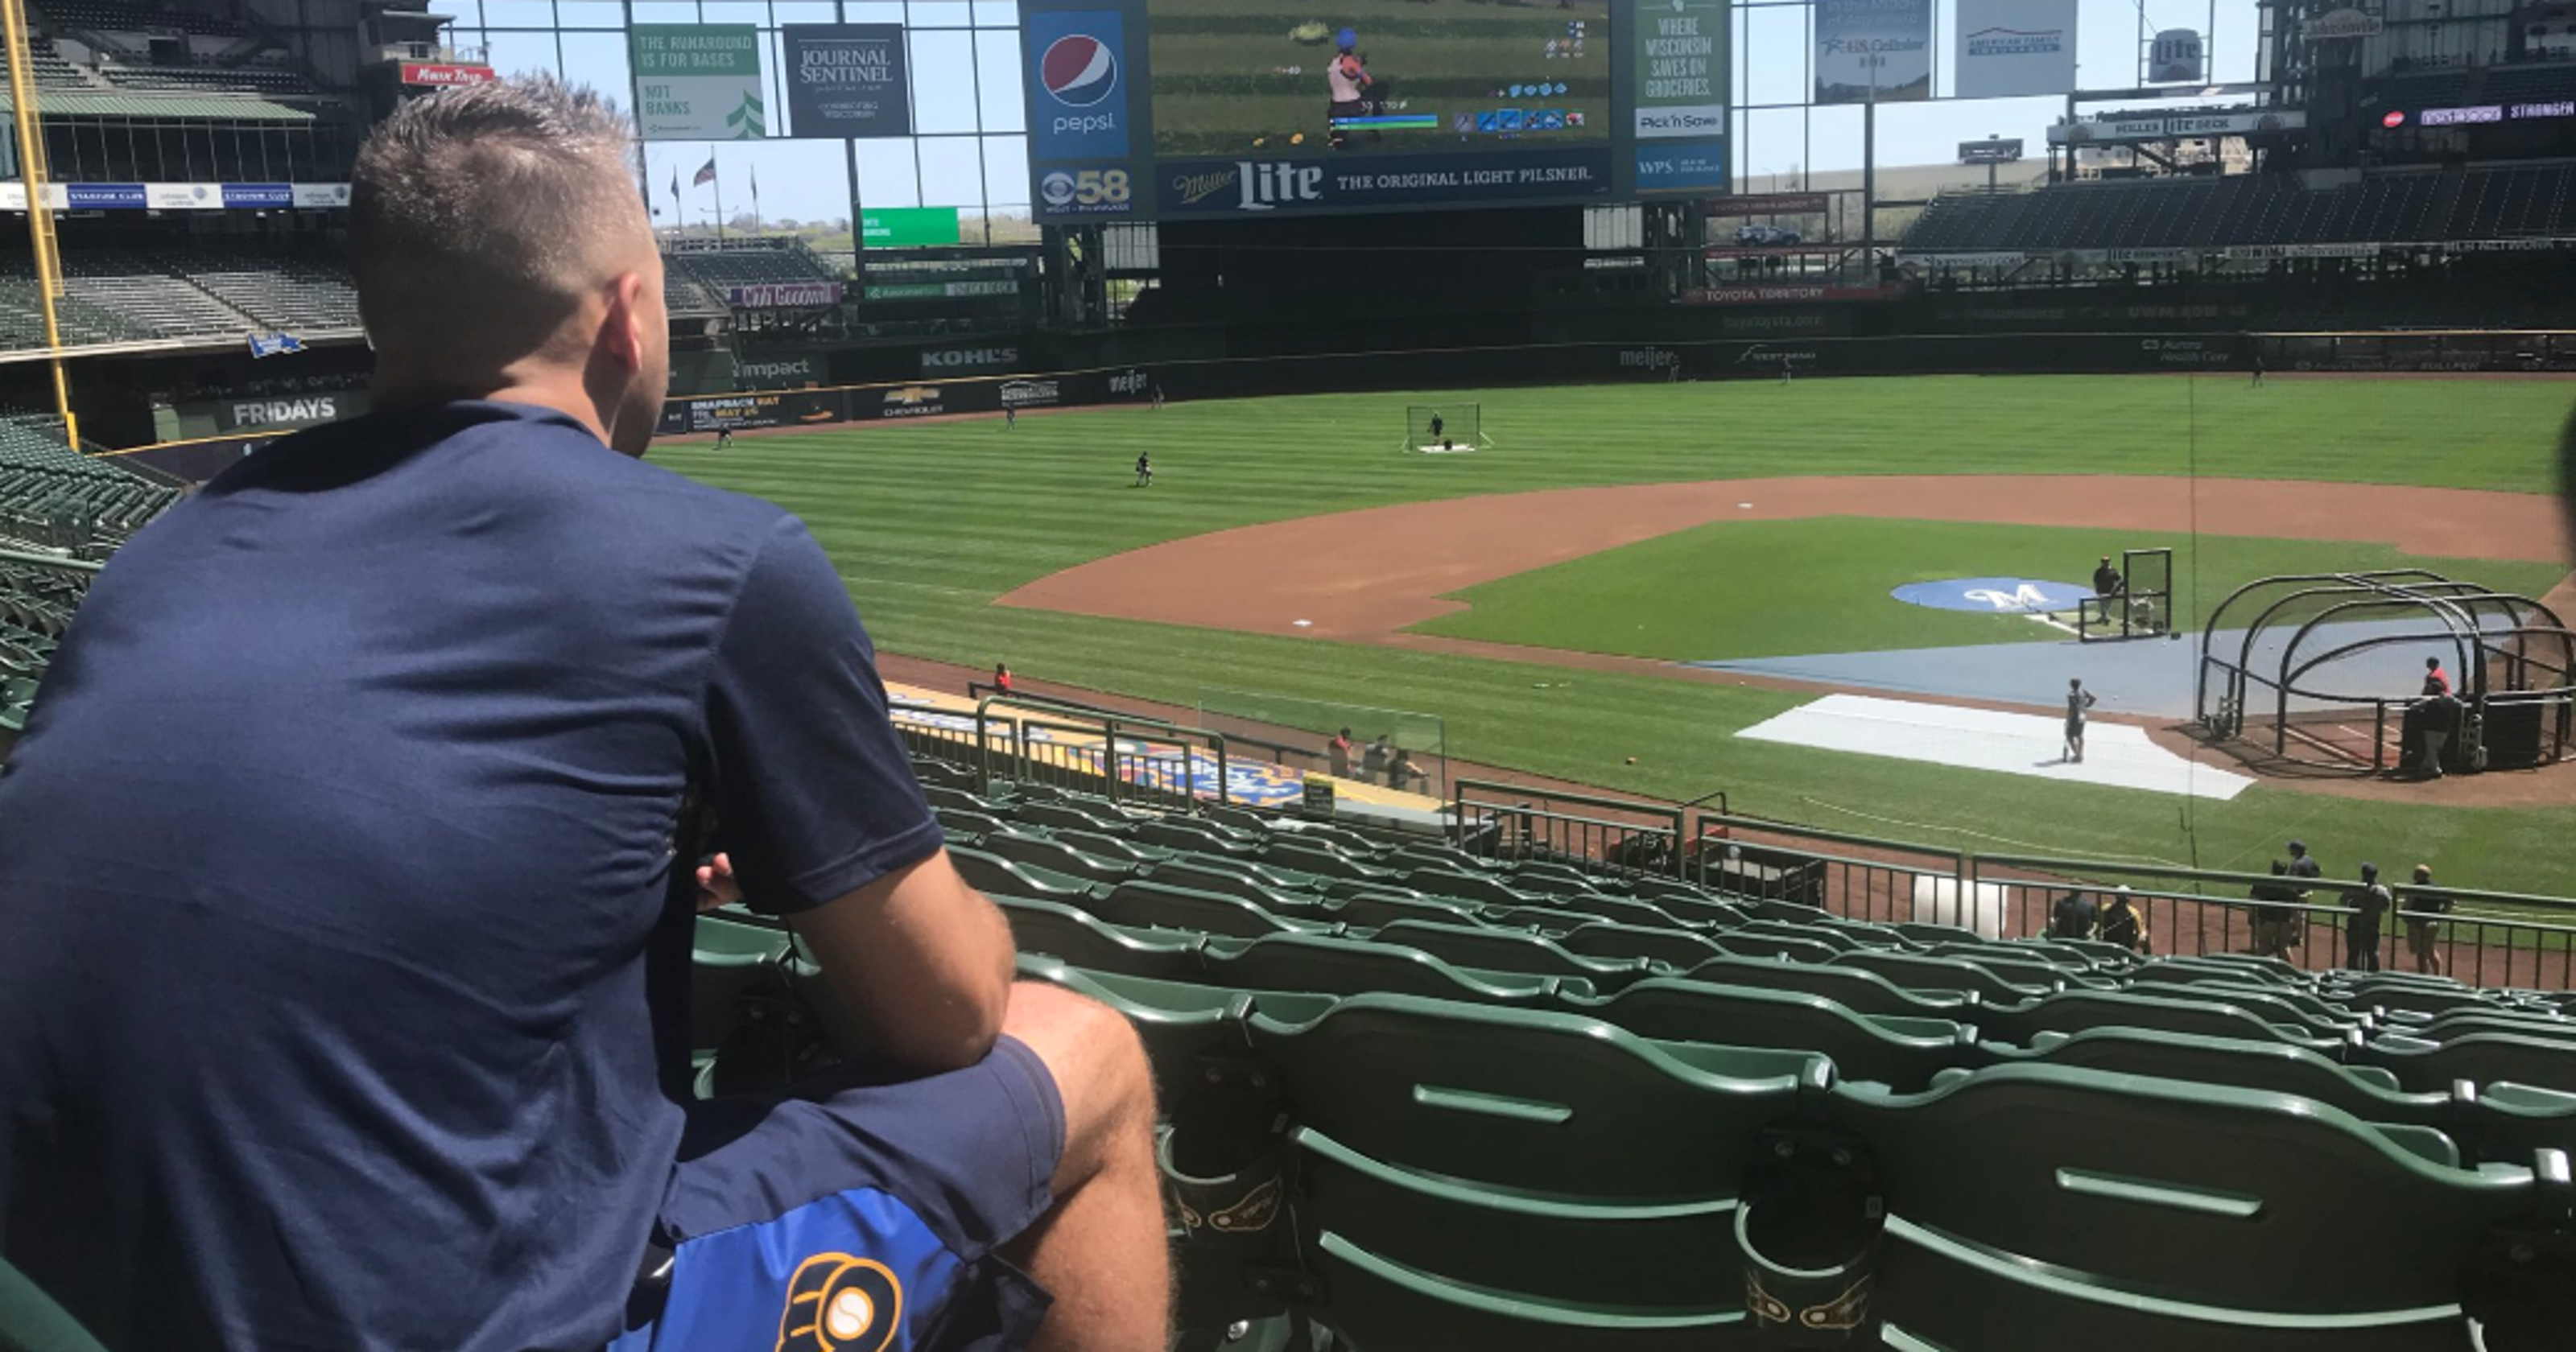 brewers play fortnite using miller park s center field scoreboard - brewers play fortnite in stadium